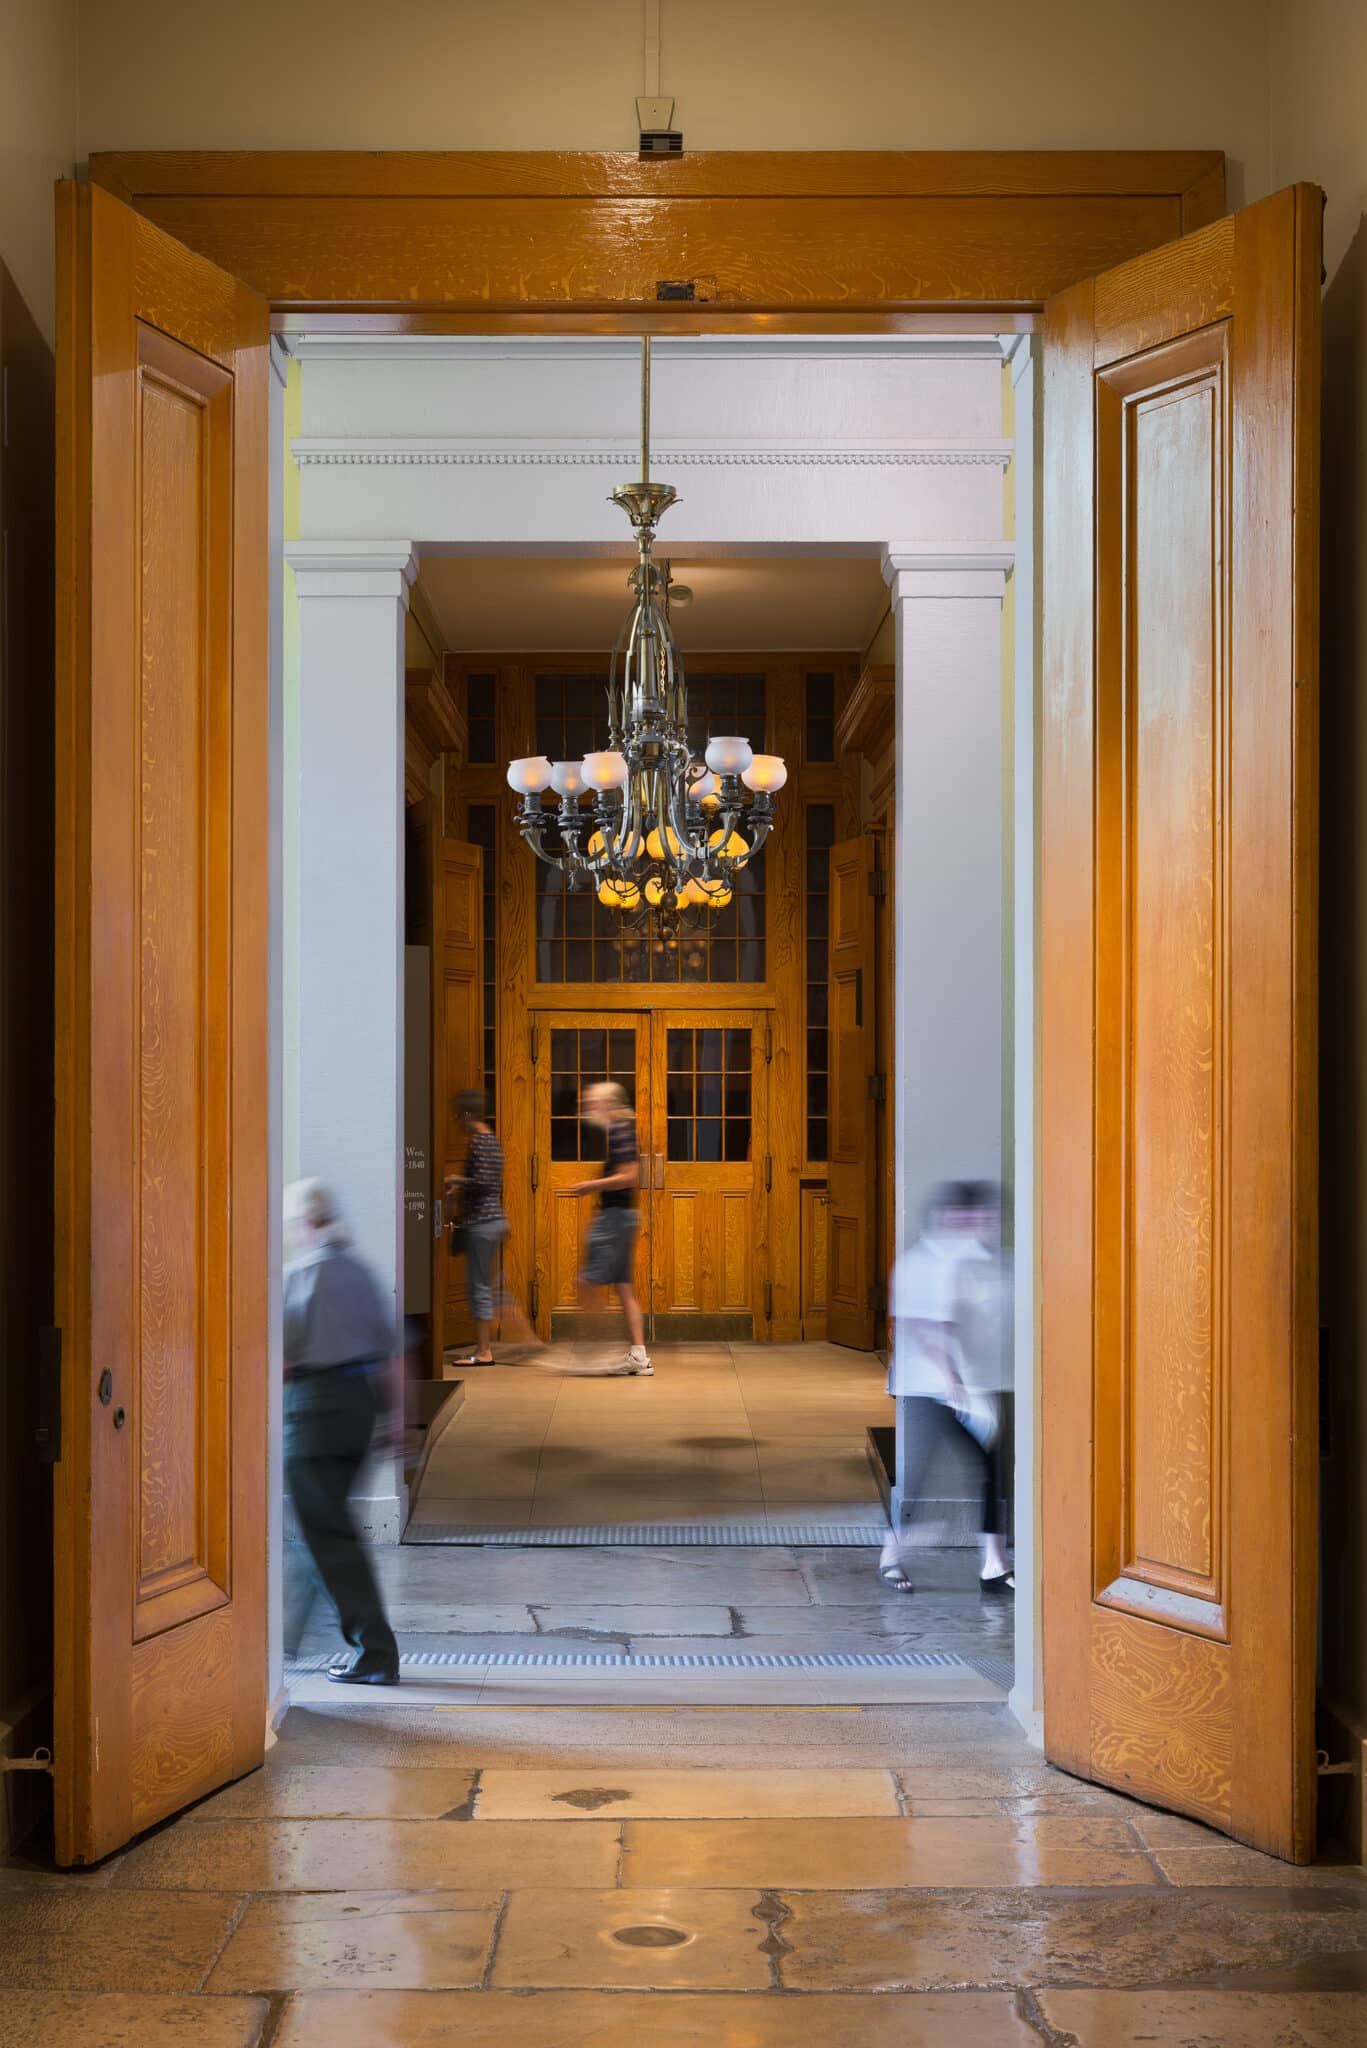 interior of old courthouse doors designed by trivers architectural firm in st. louis